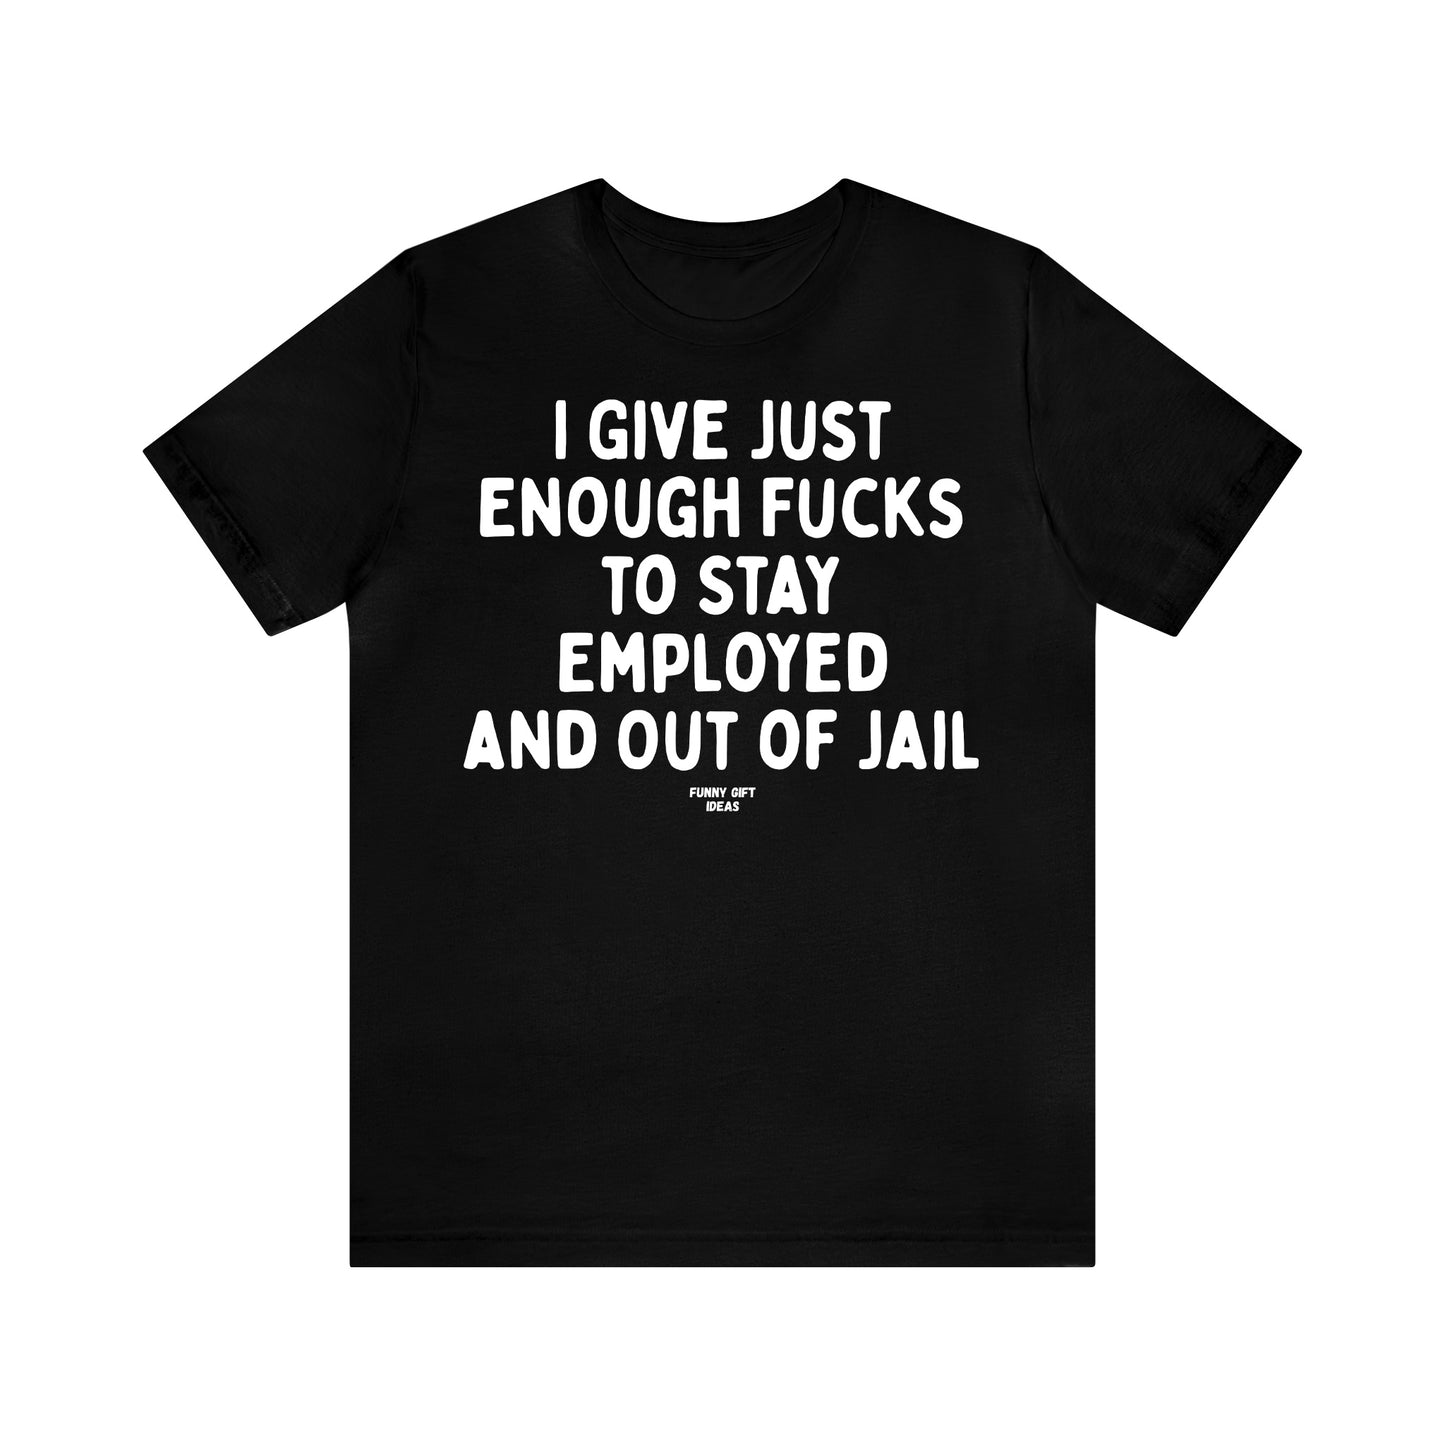 Funny Shirts for Women - I Give Just Enough Fucks to Stay Employed and Out of Jail - Women's T Shirts